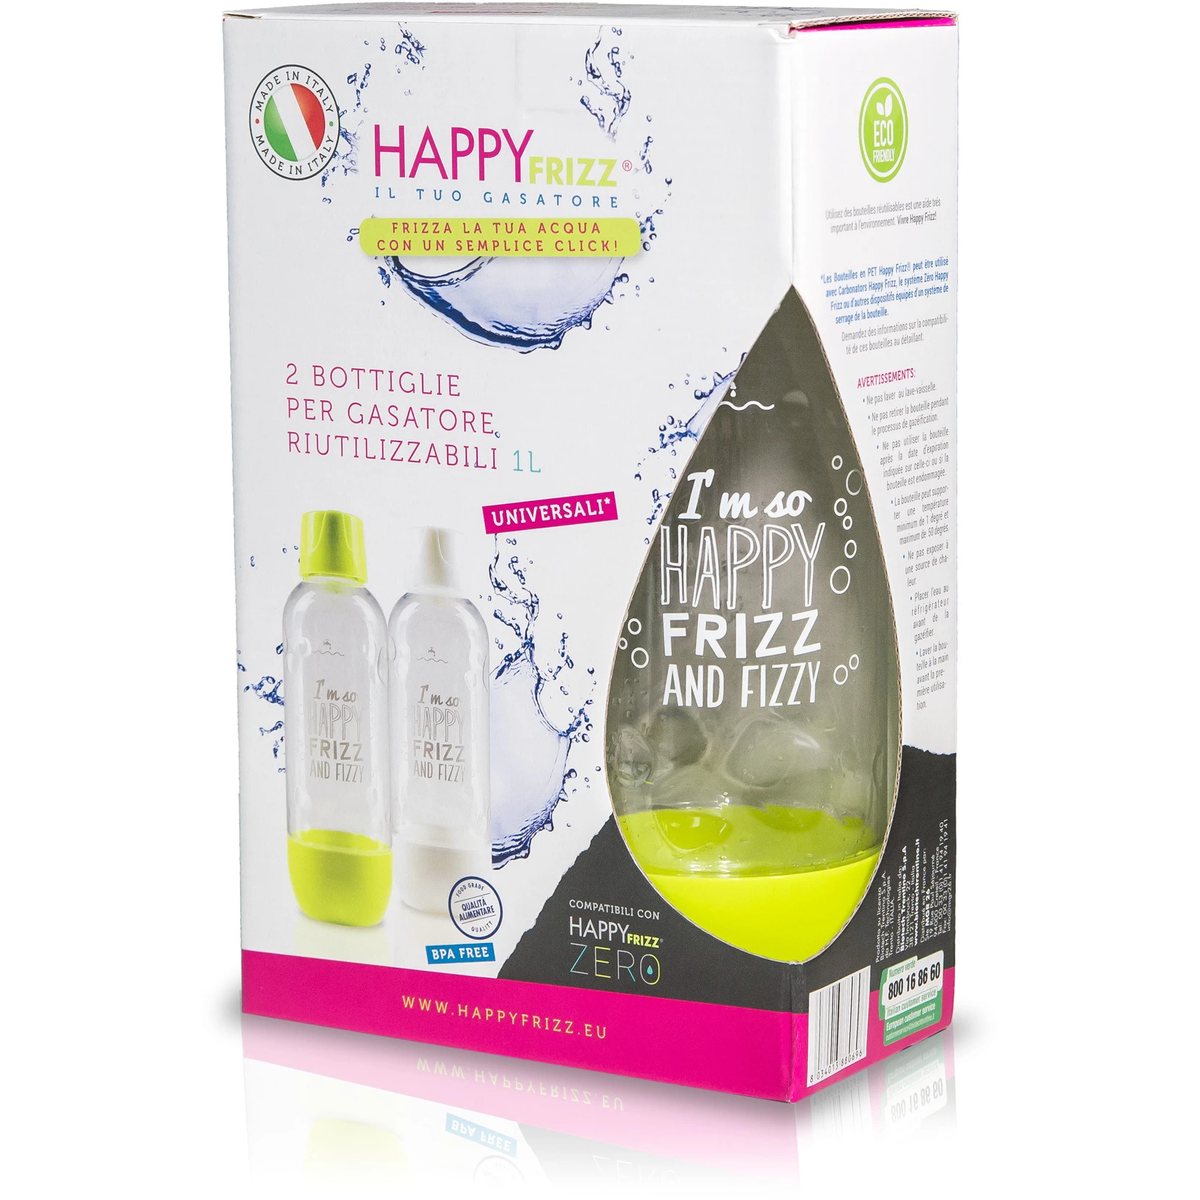 Happy Frizz 1L Universal Carbonating Bottles Pack of 2 - Green | BOT01 (7670850814140)